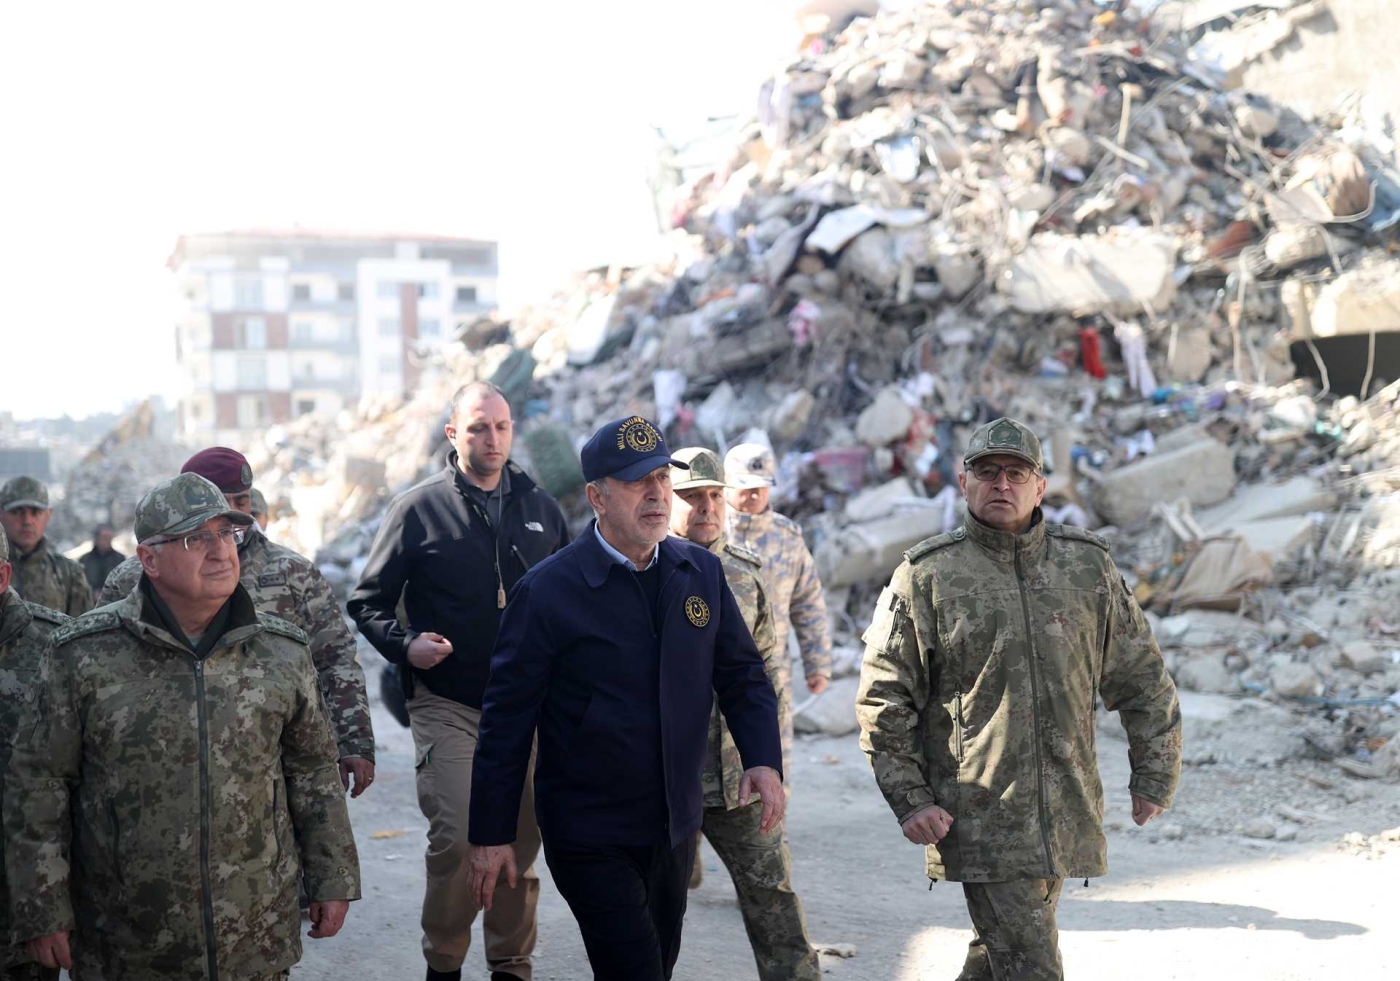 The Turkish defense minister Hulusi Akar inspects the earthquake response activities in Turkey's Hatay on 15 February 2023 (Turkish Defense Ministry)